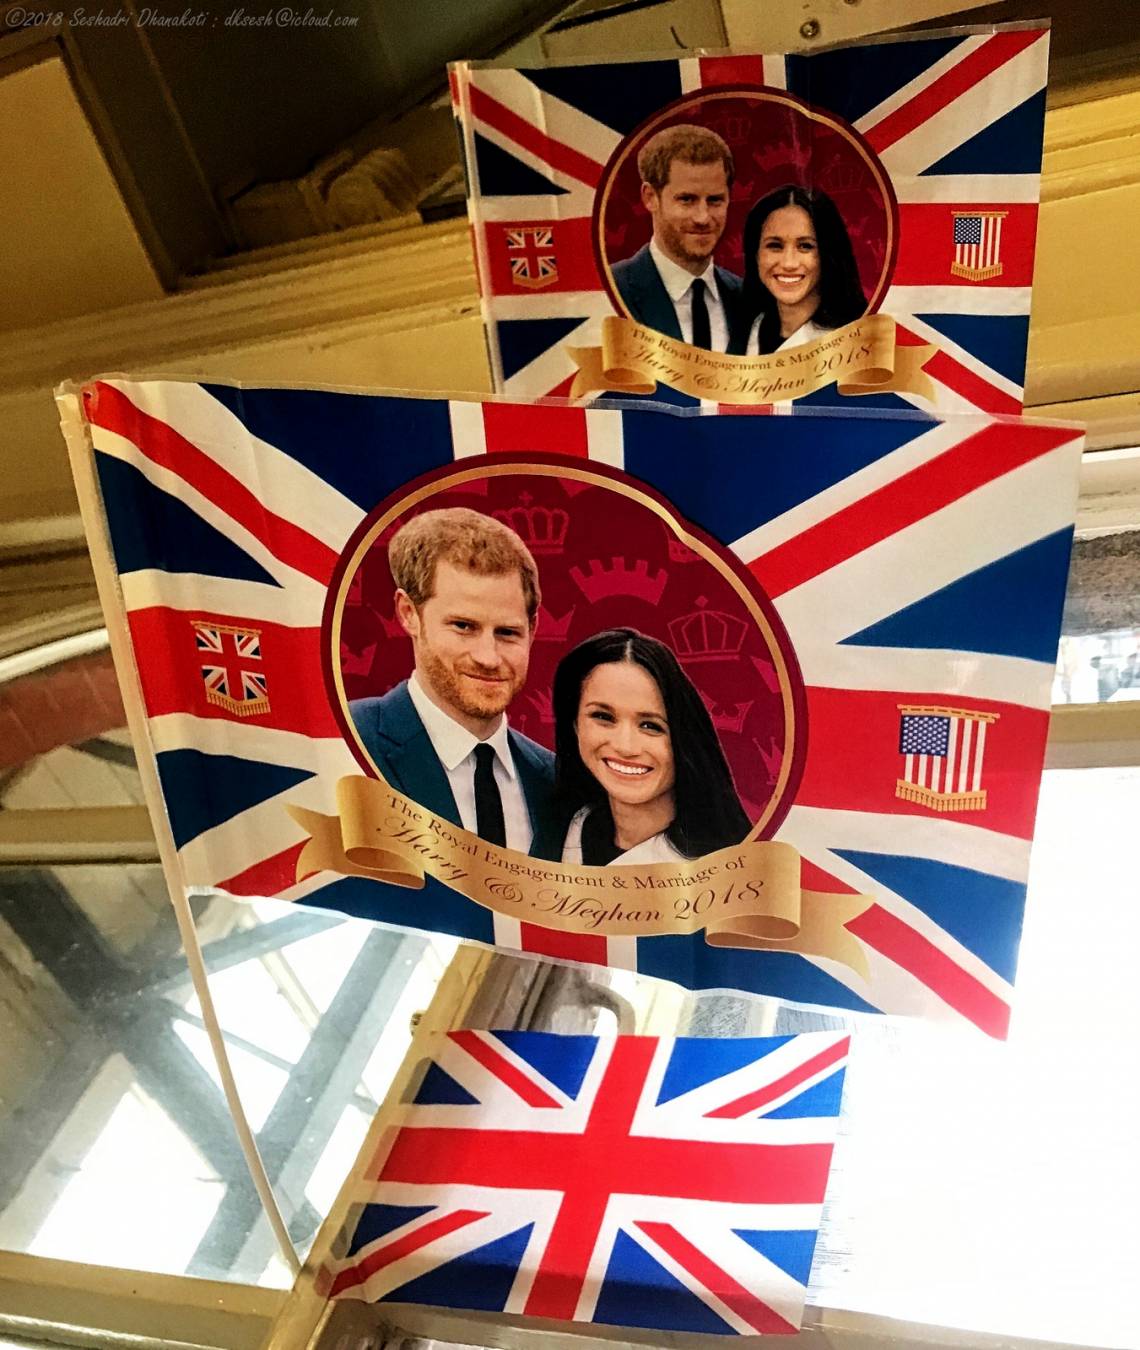 Wedding celebration decorations picturing Meghan Markle and Prince Harry, photographed at Clapham Junction station in London, England.